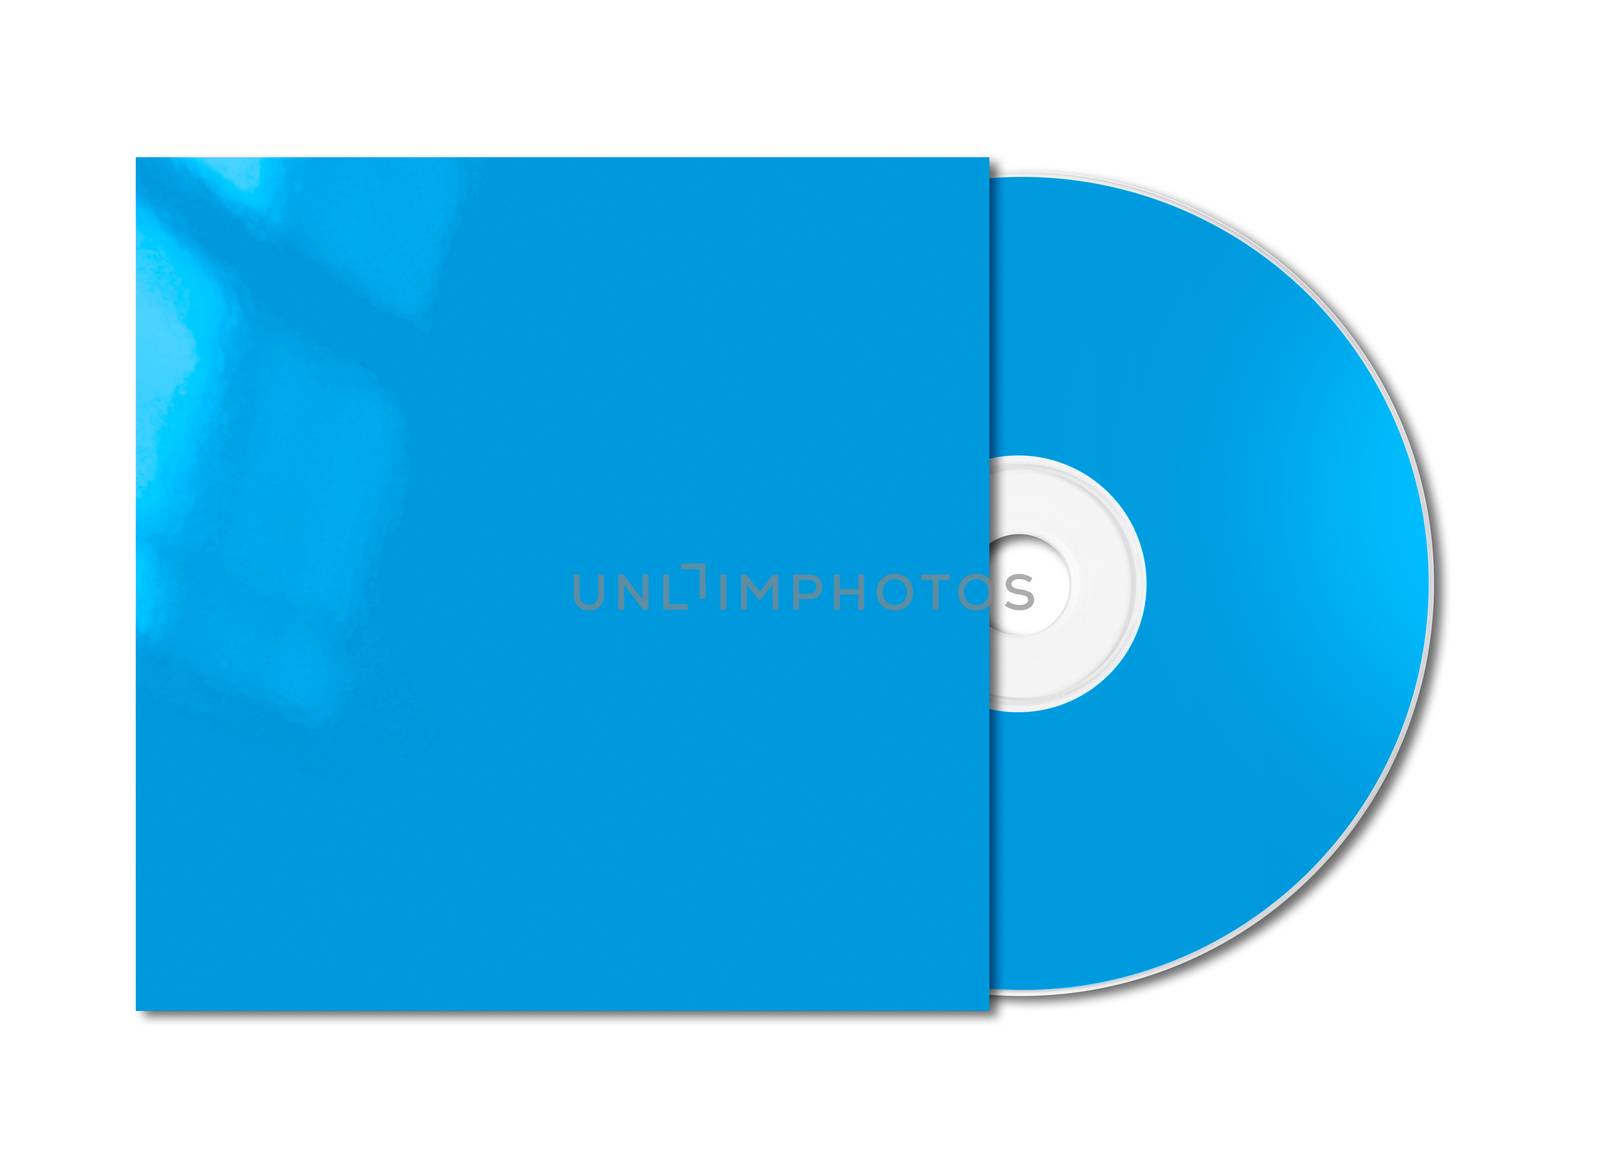 Blue CD - DVD and cover mockup template isolated on white